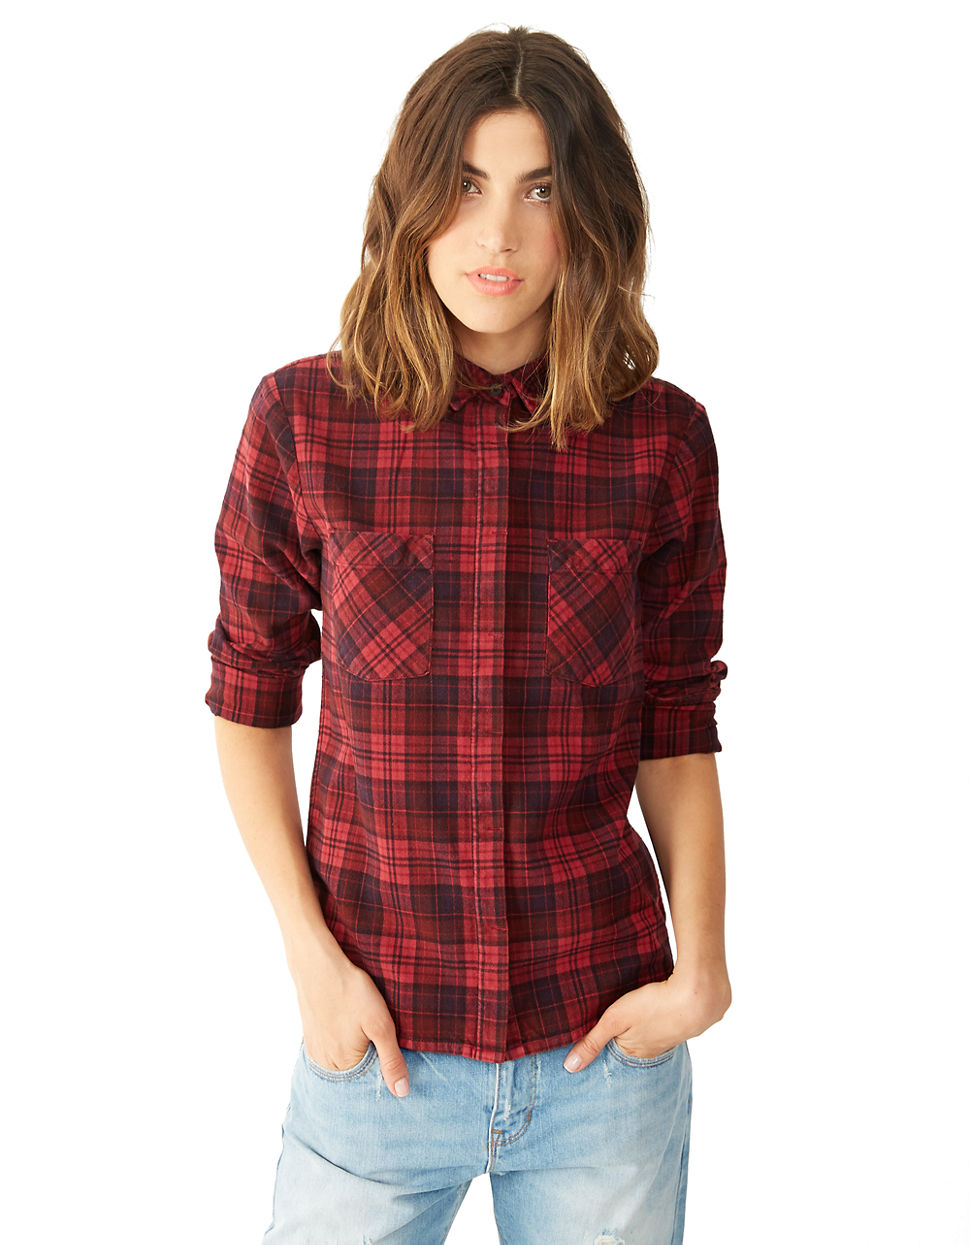 Lyst - Alternative Apparel Plaid Flannel Button Down Shirt in Red